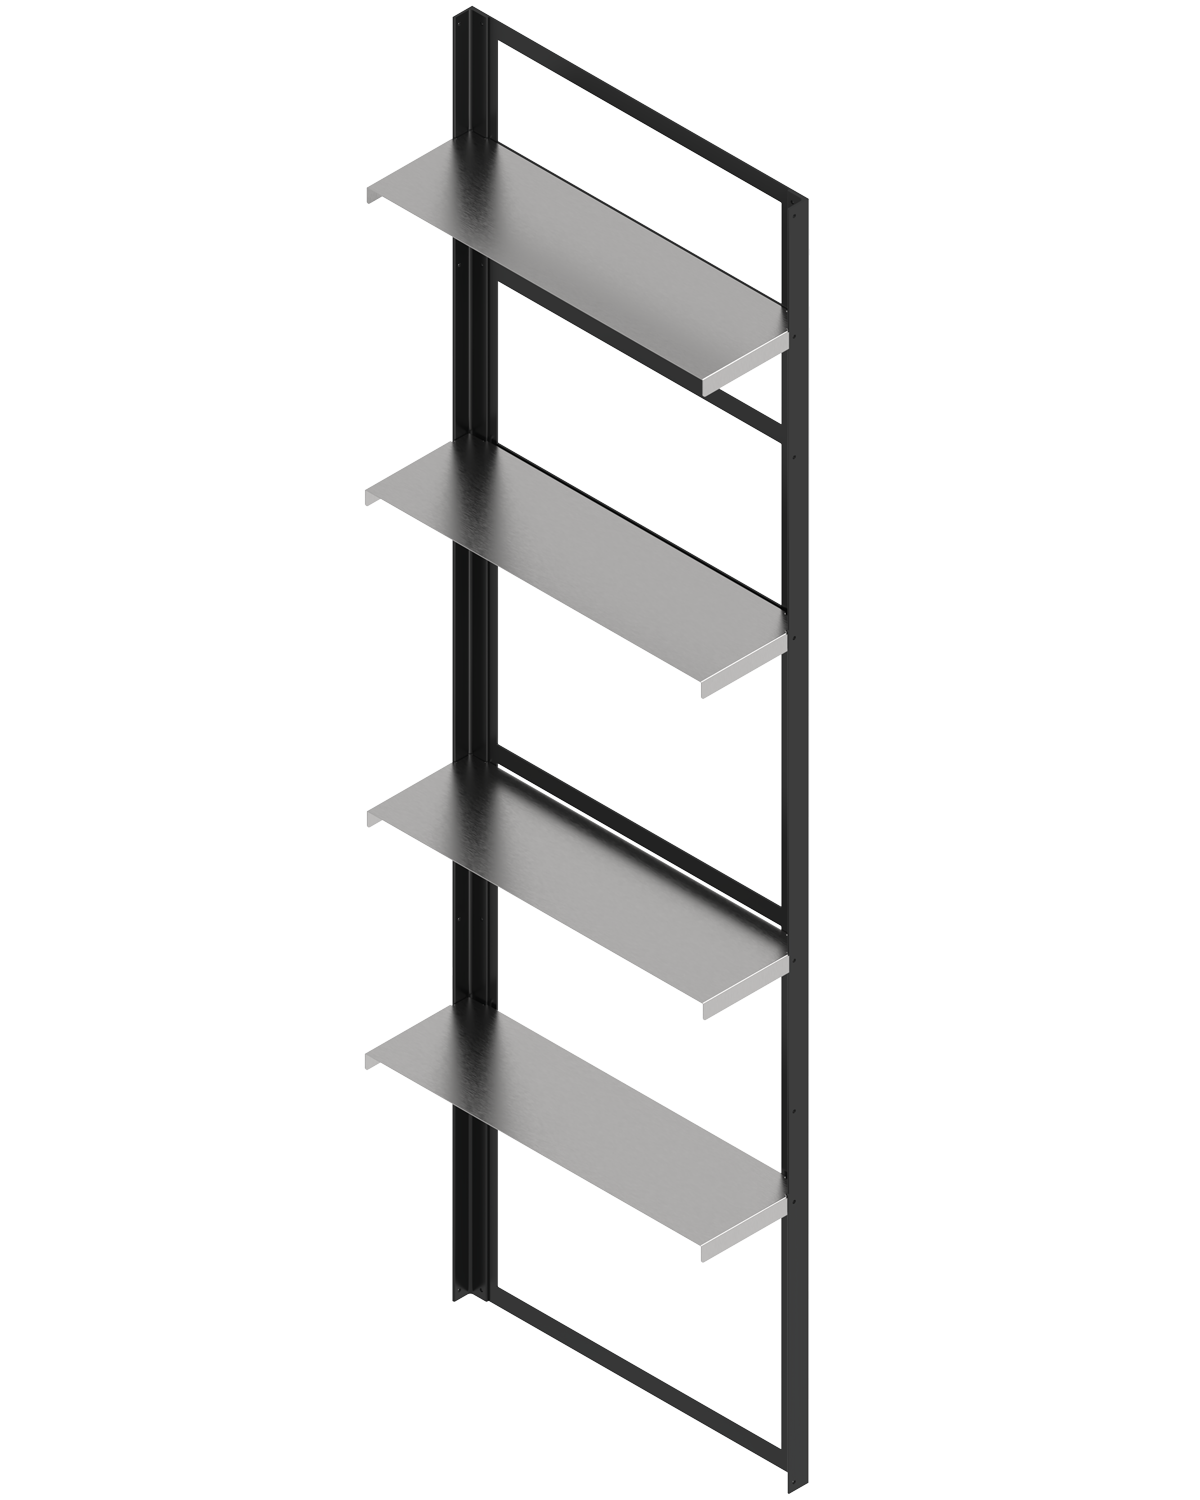 https://possi.kitchen/wp-content/uploads/large_wall_shelf_stainless_Steel.png